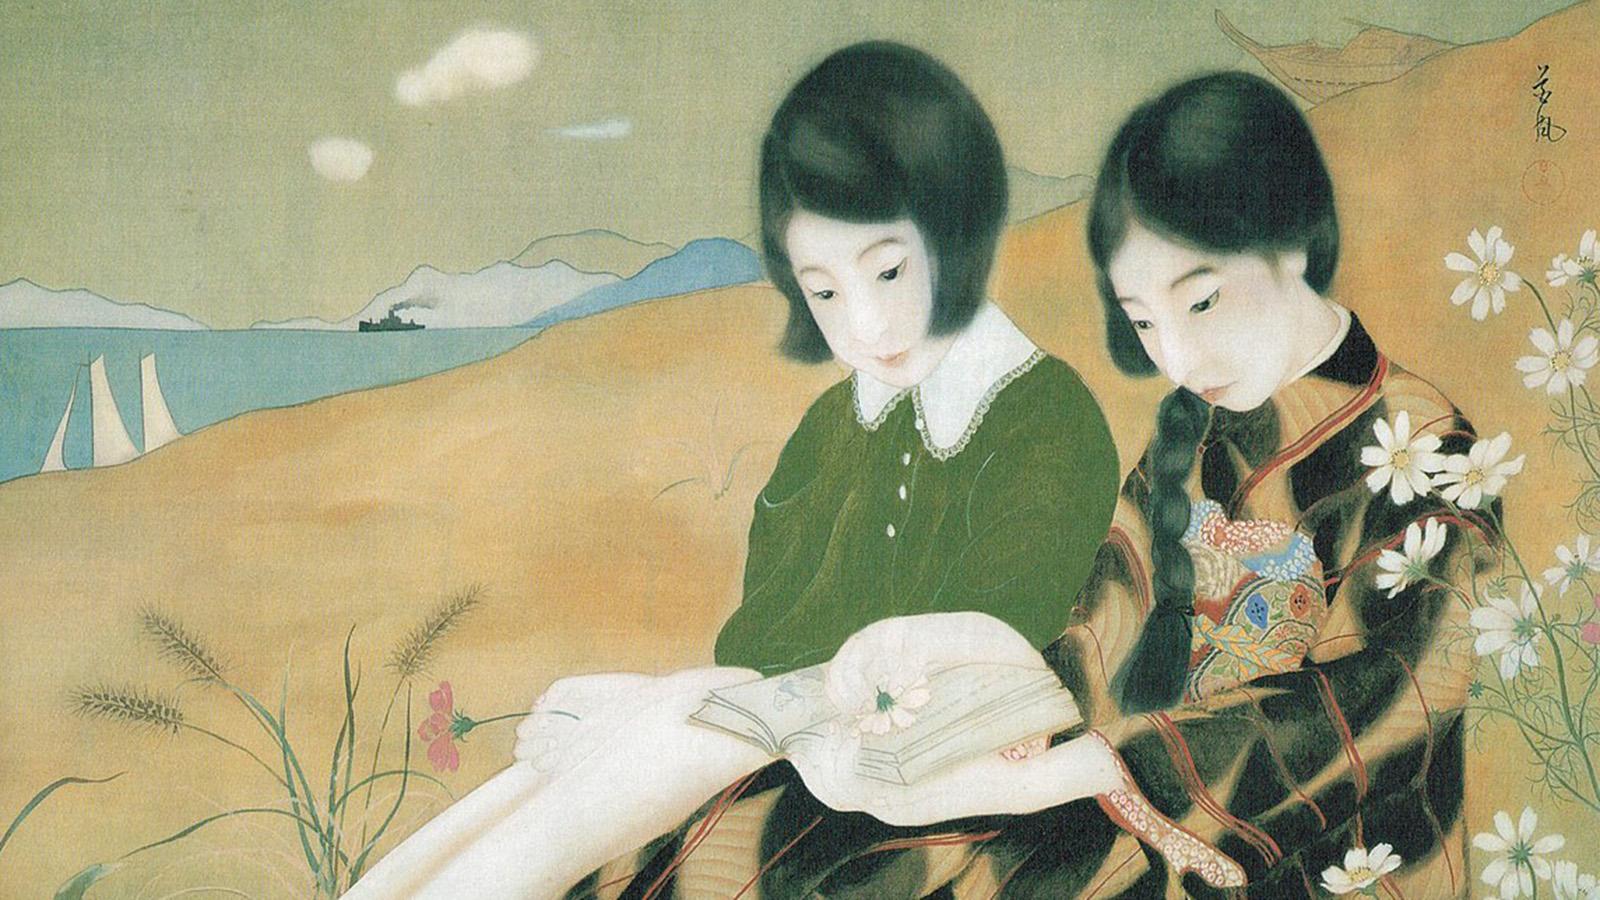 Kafu, Two Girls by the Sea (1920s)